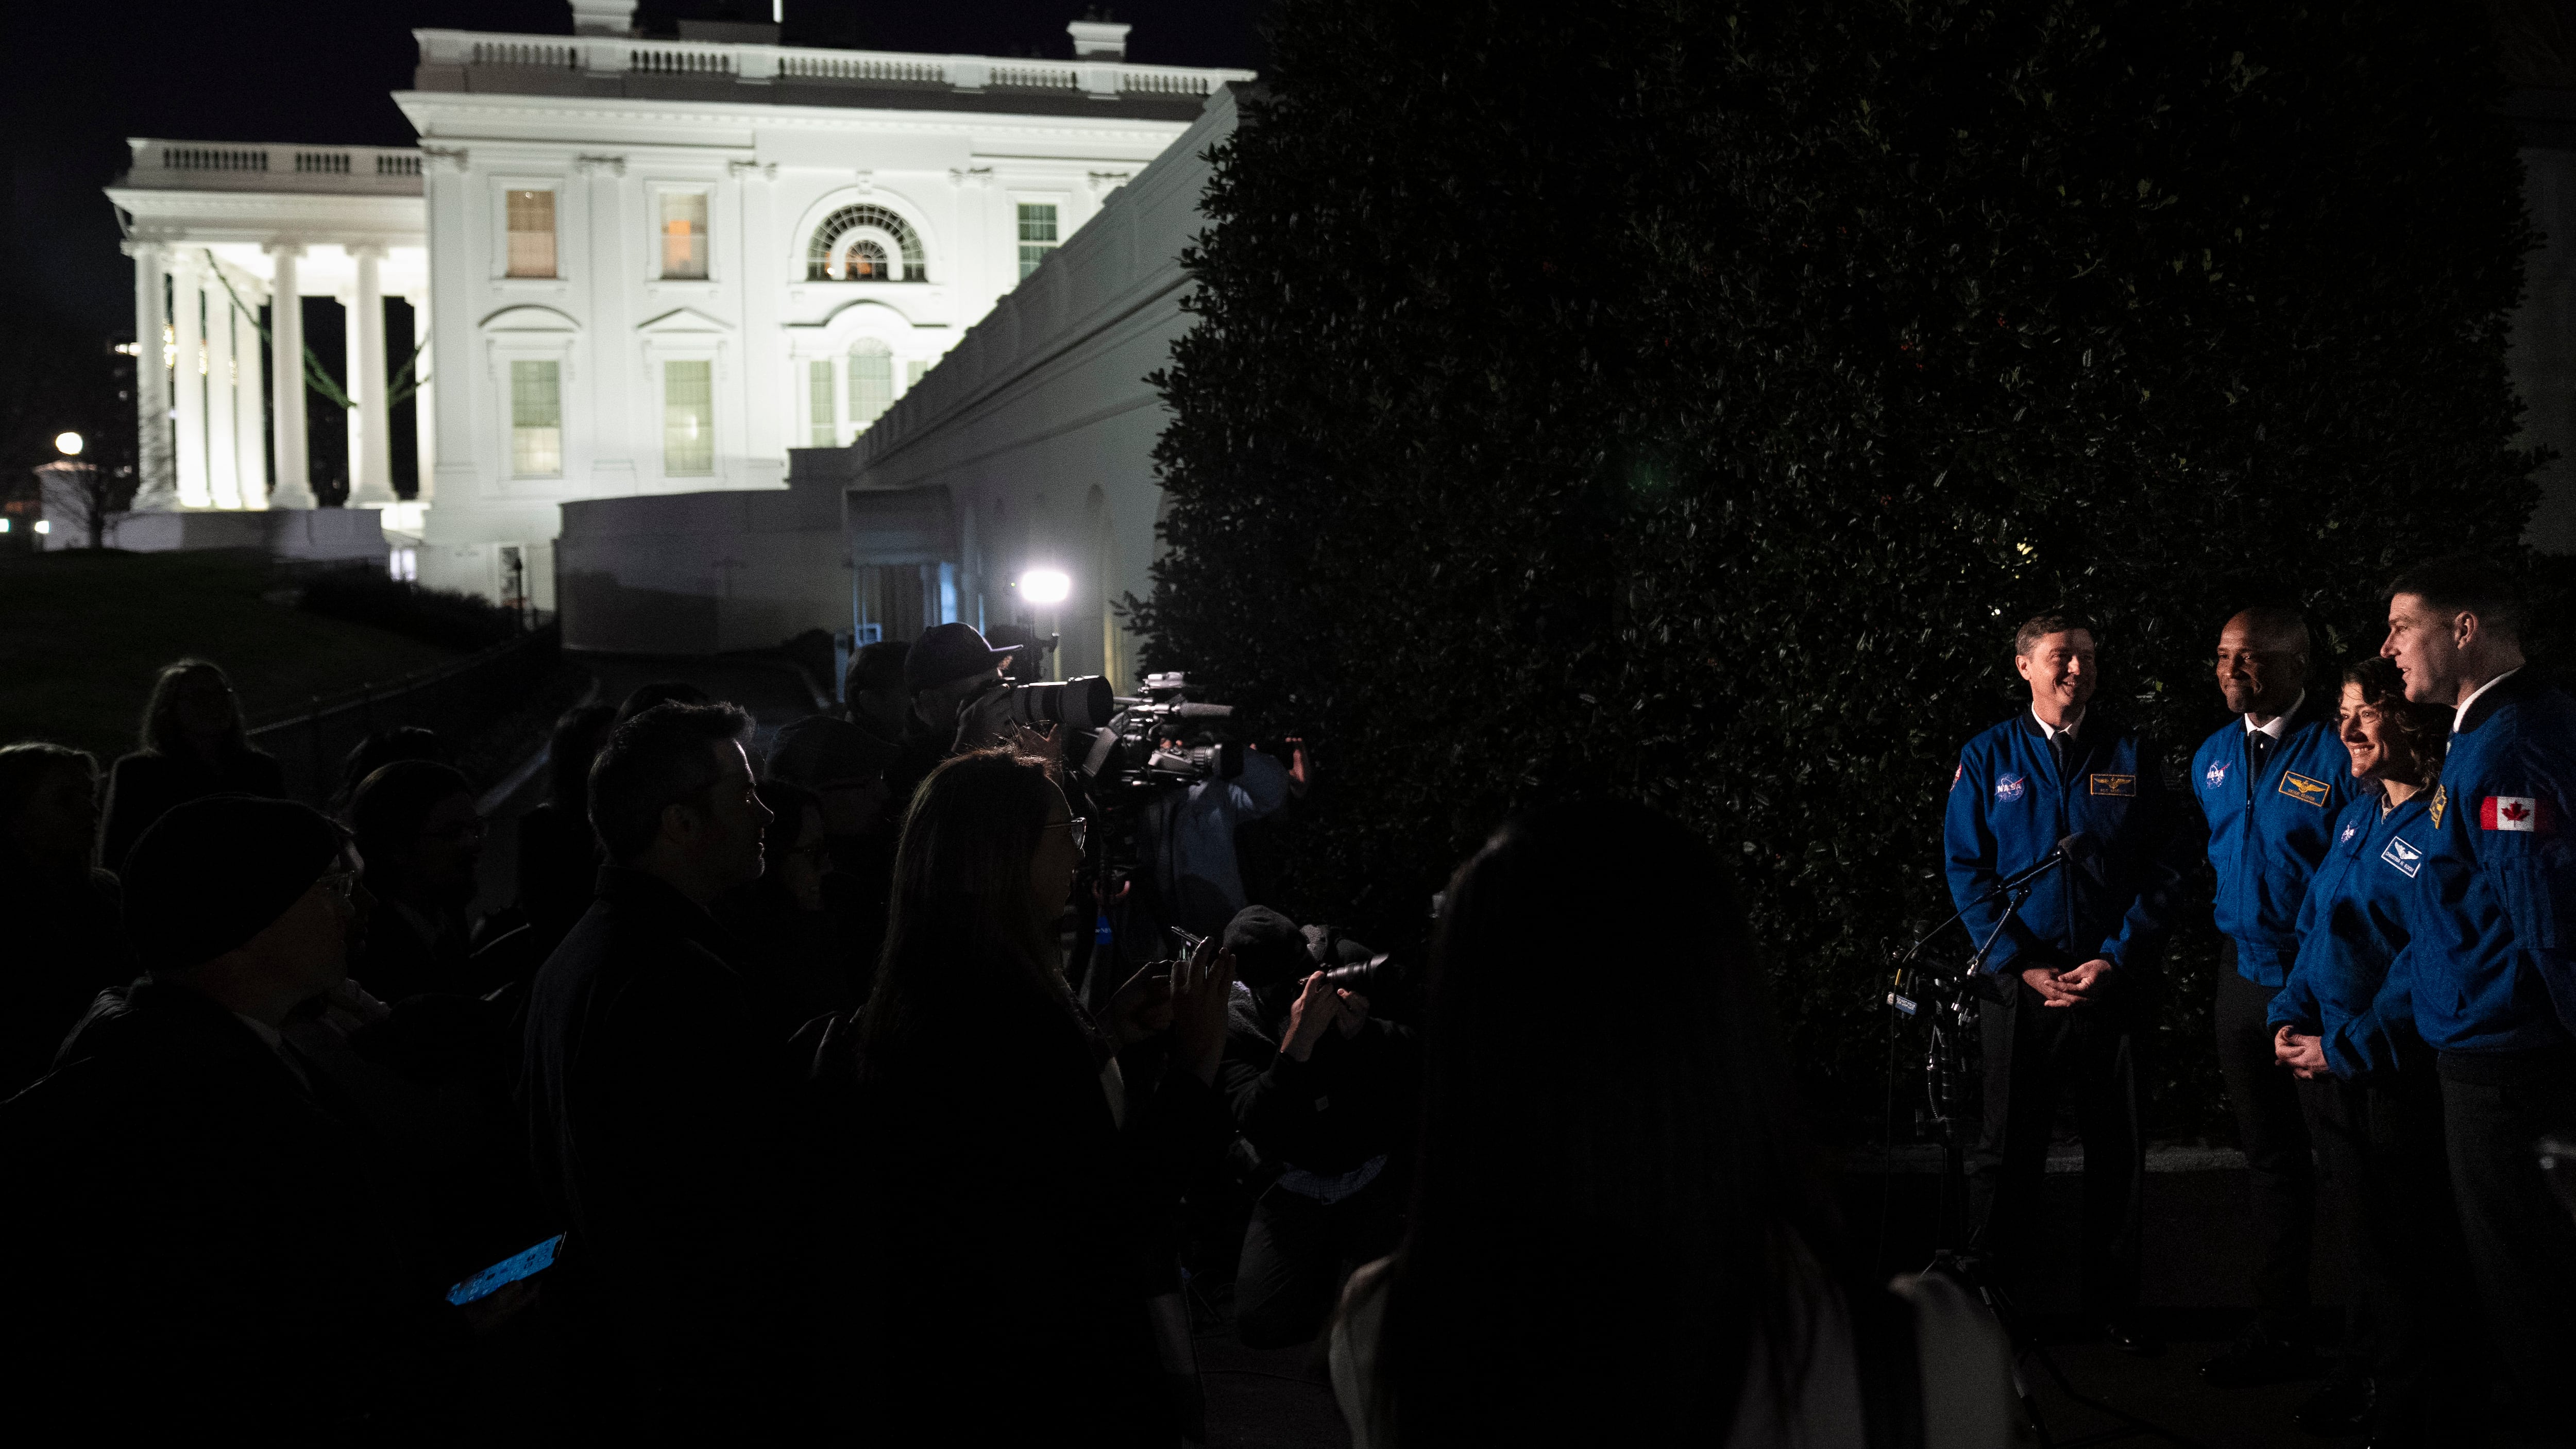 Artemis II crew members, from left, Reid Wiseman, Victor Glover, Christina Hammock Koch,and Jeremy Hansen speak to the media outside the West Wing of the White House (Andrew Harnik/AP)